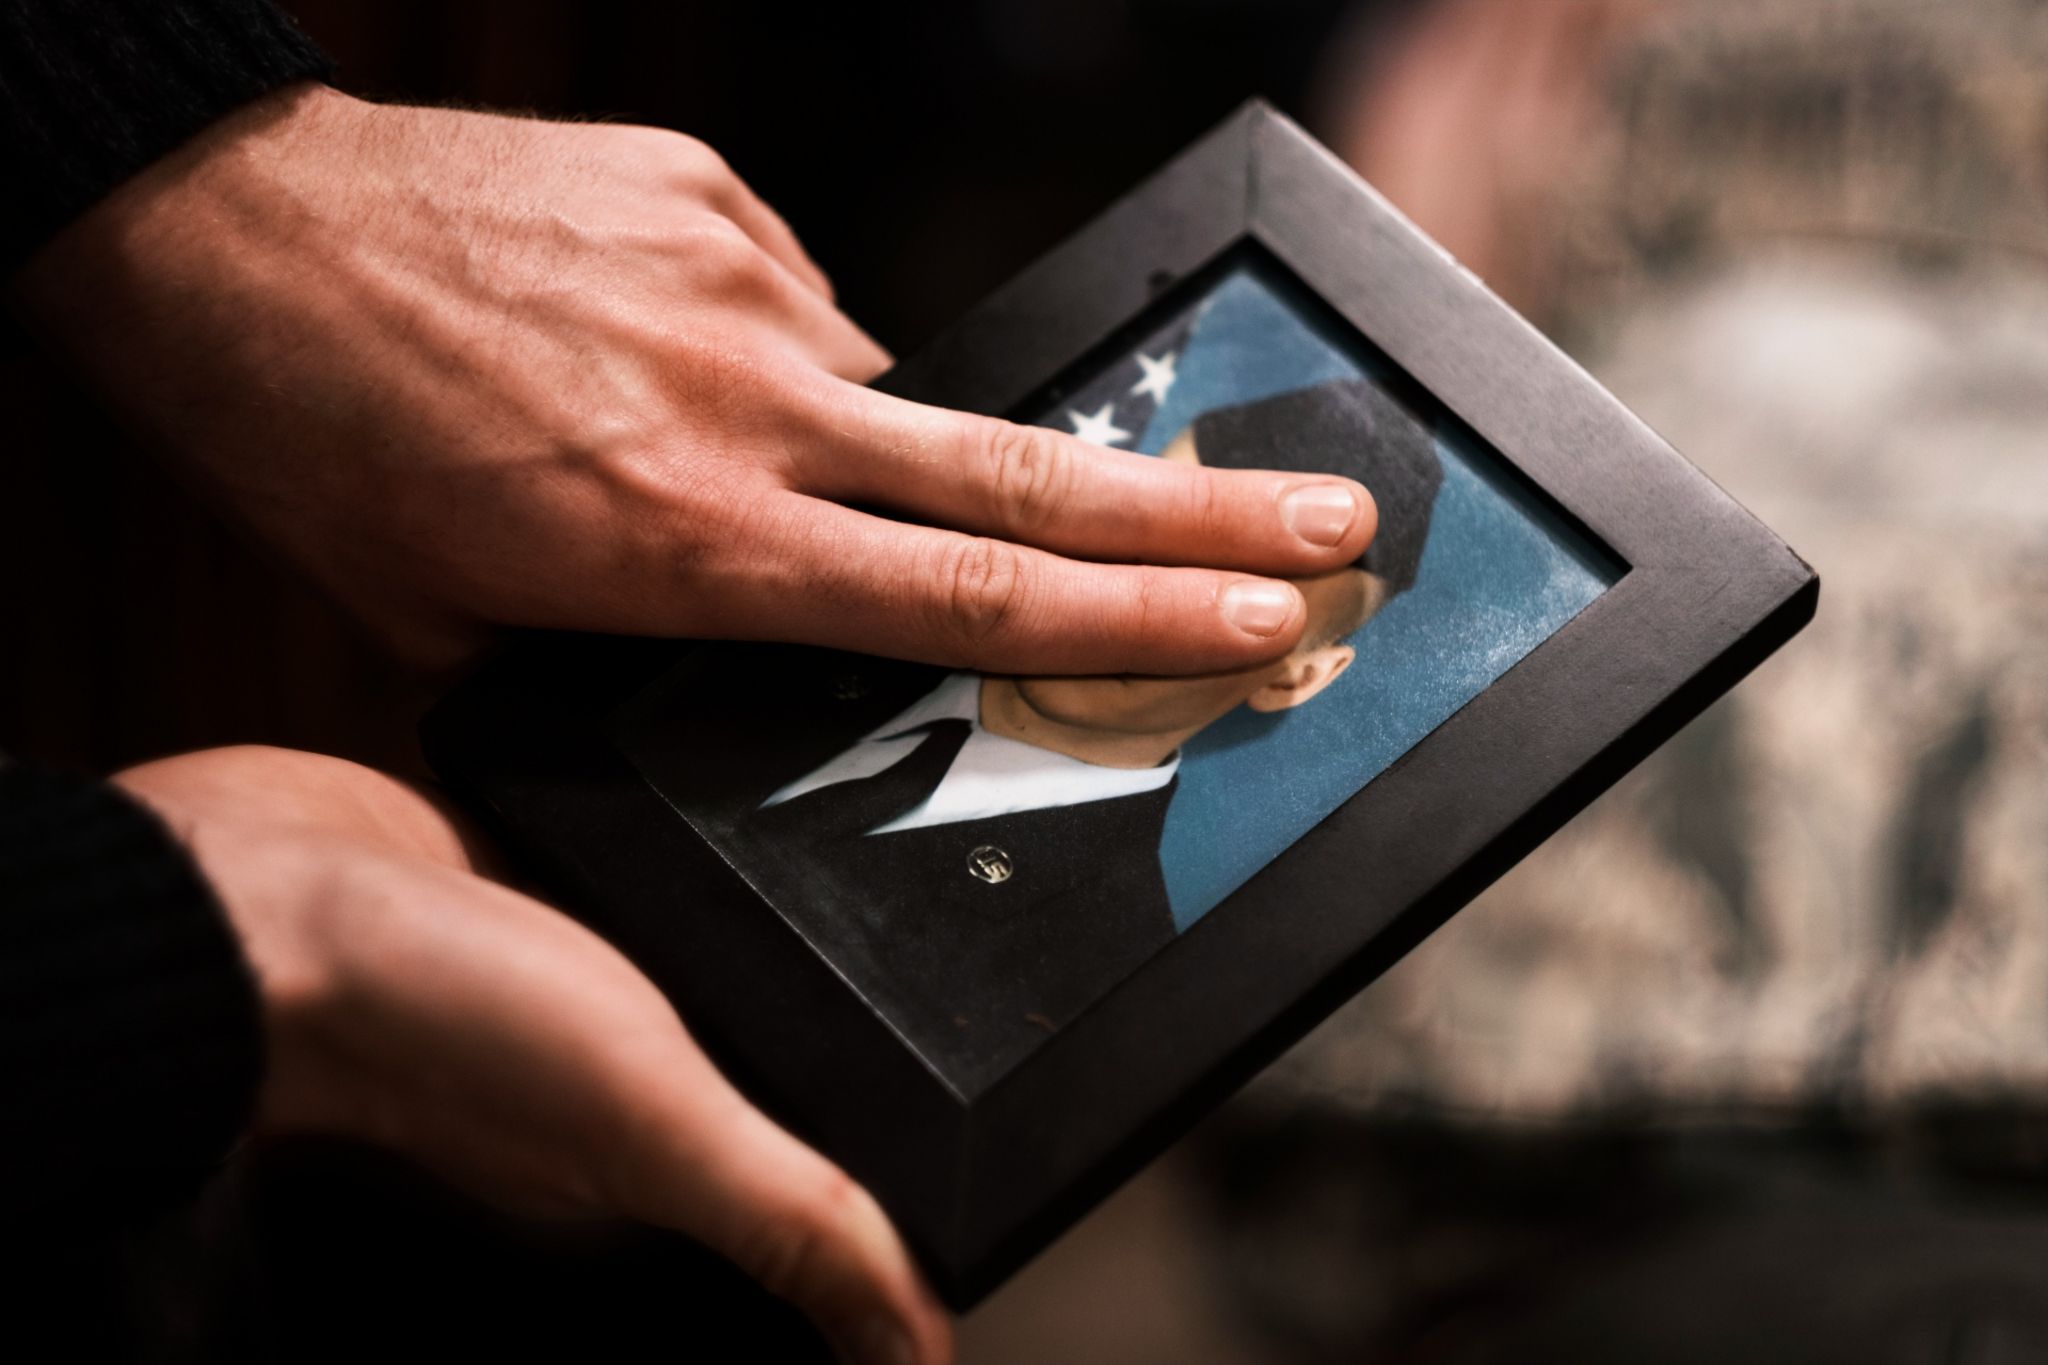 Max using his fingers to conceal his face on a photograph of himself as an airman